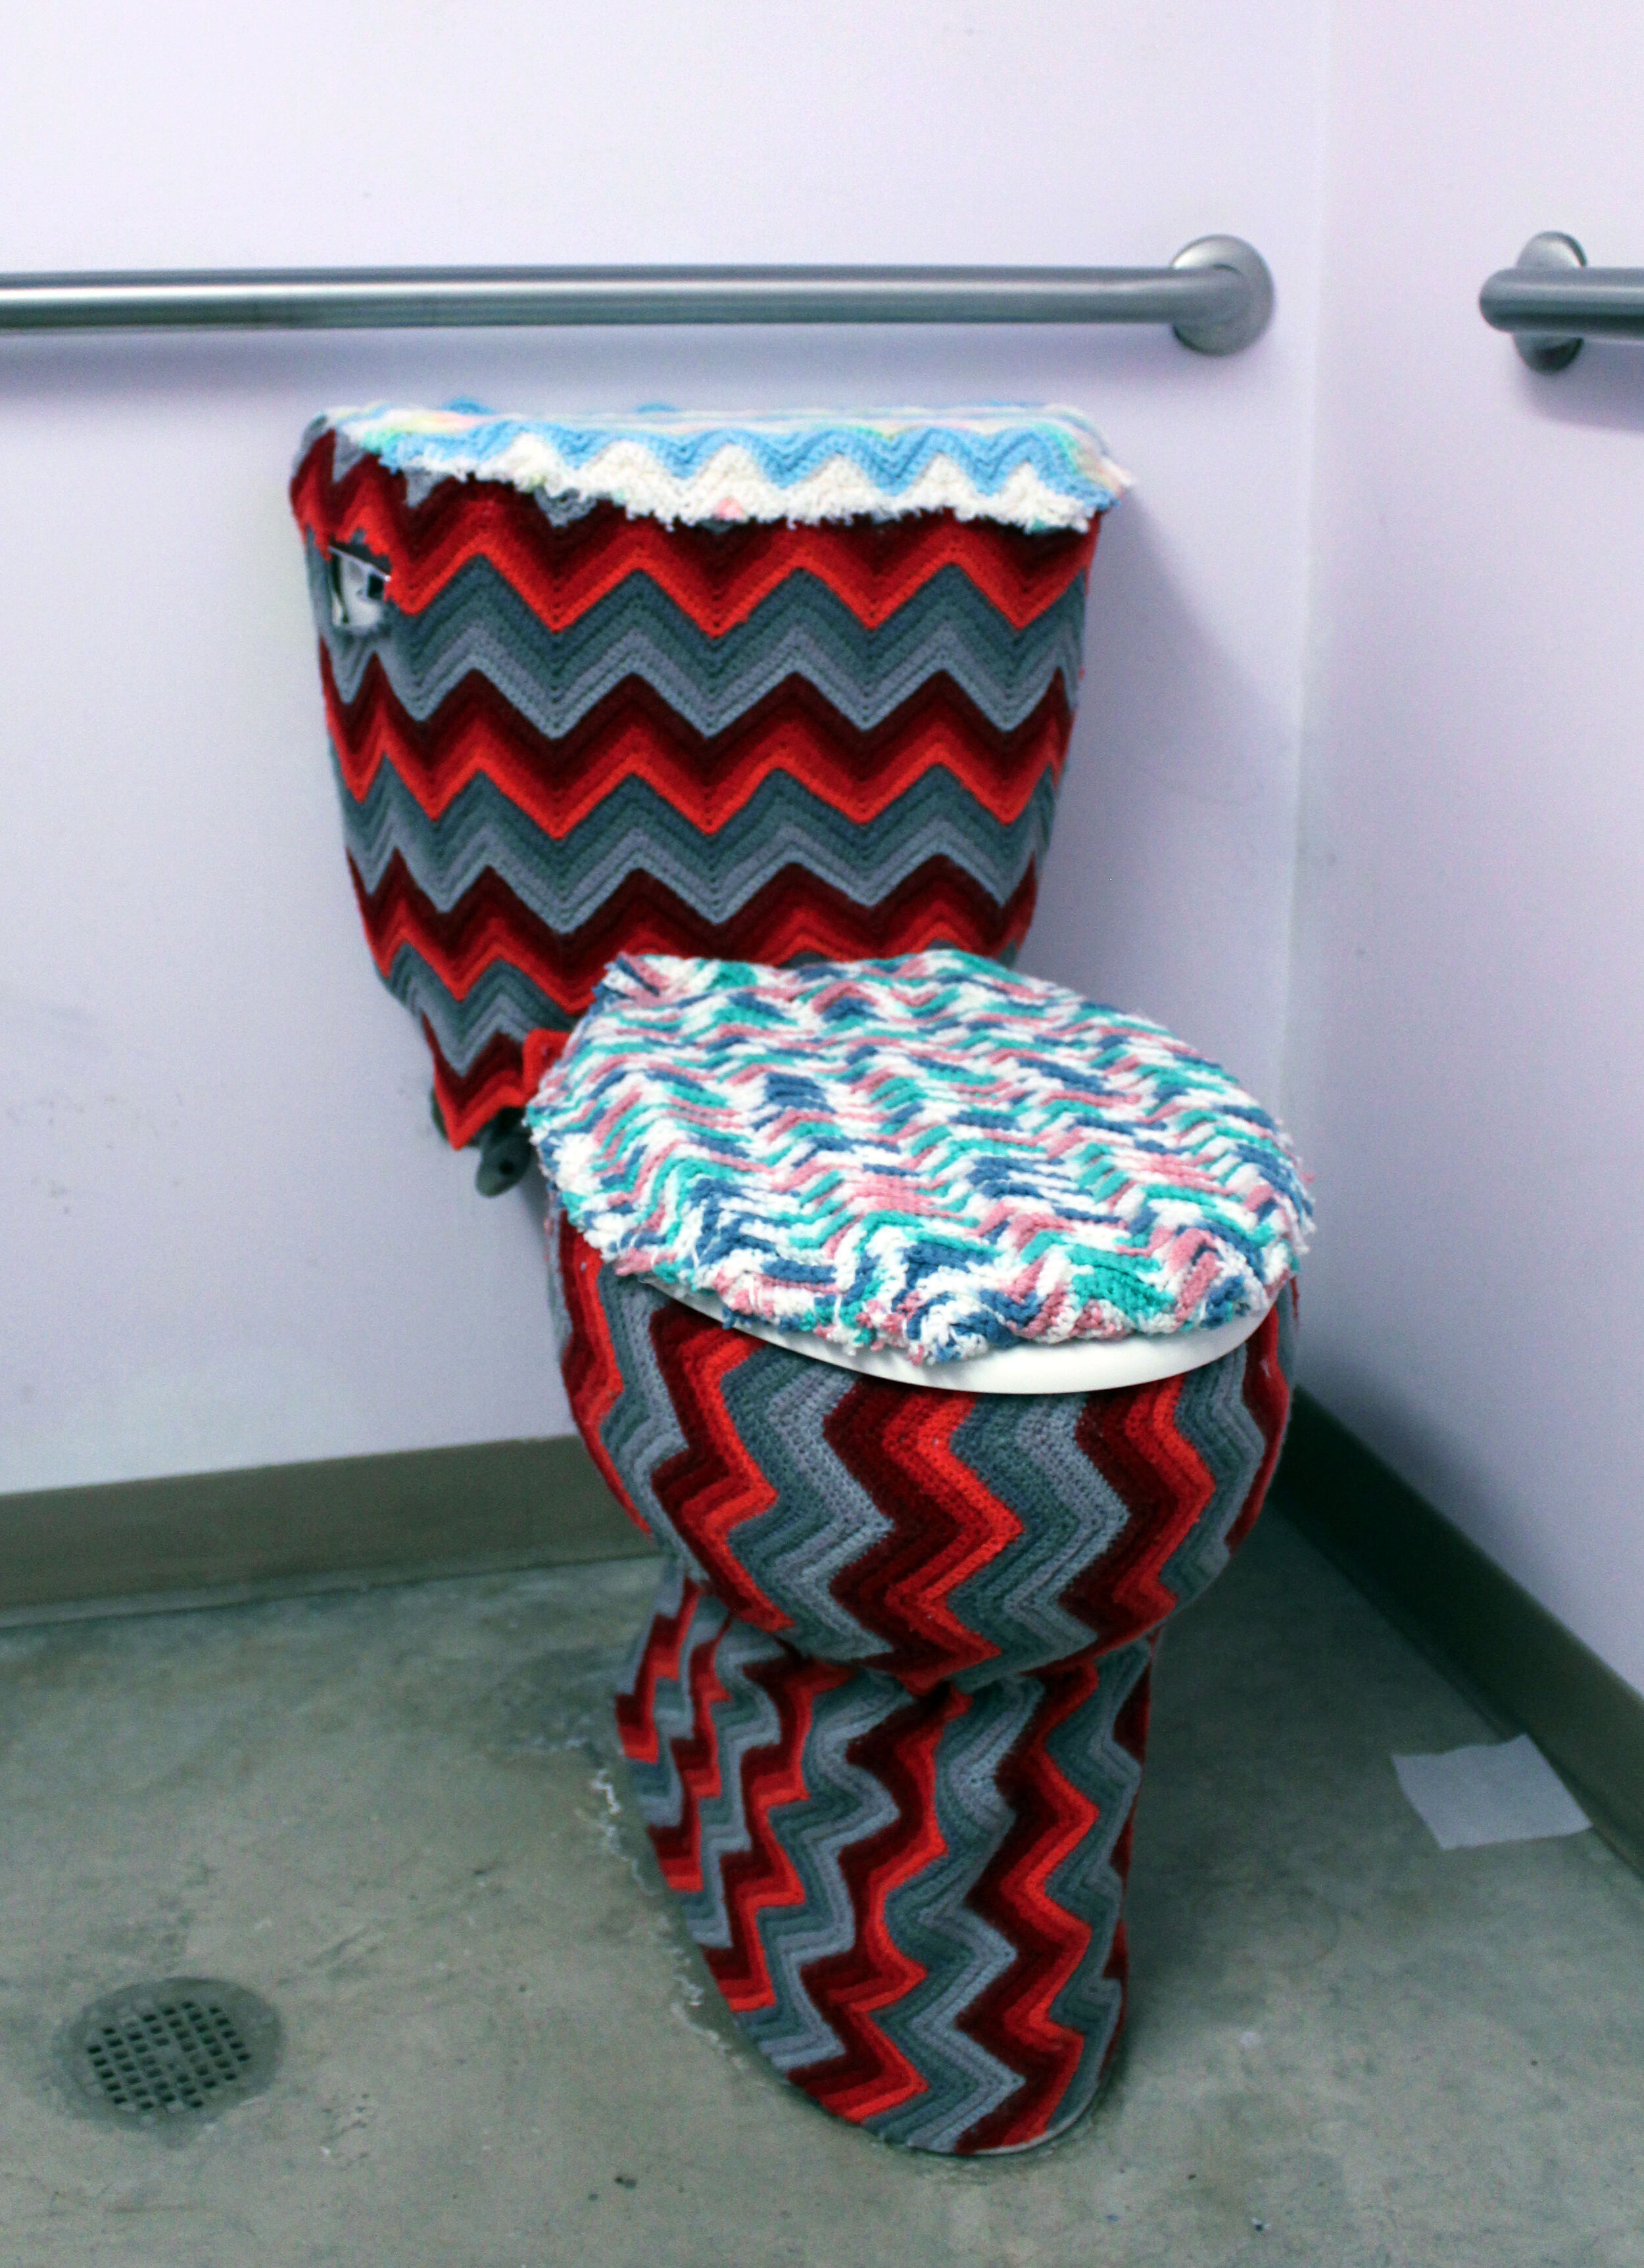  shared studio space toilets were “yarn bombed” with thrifted afghans for 2 weeks  